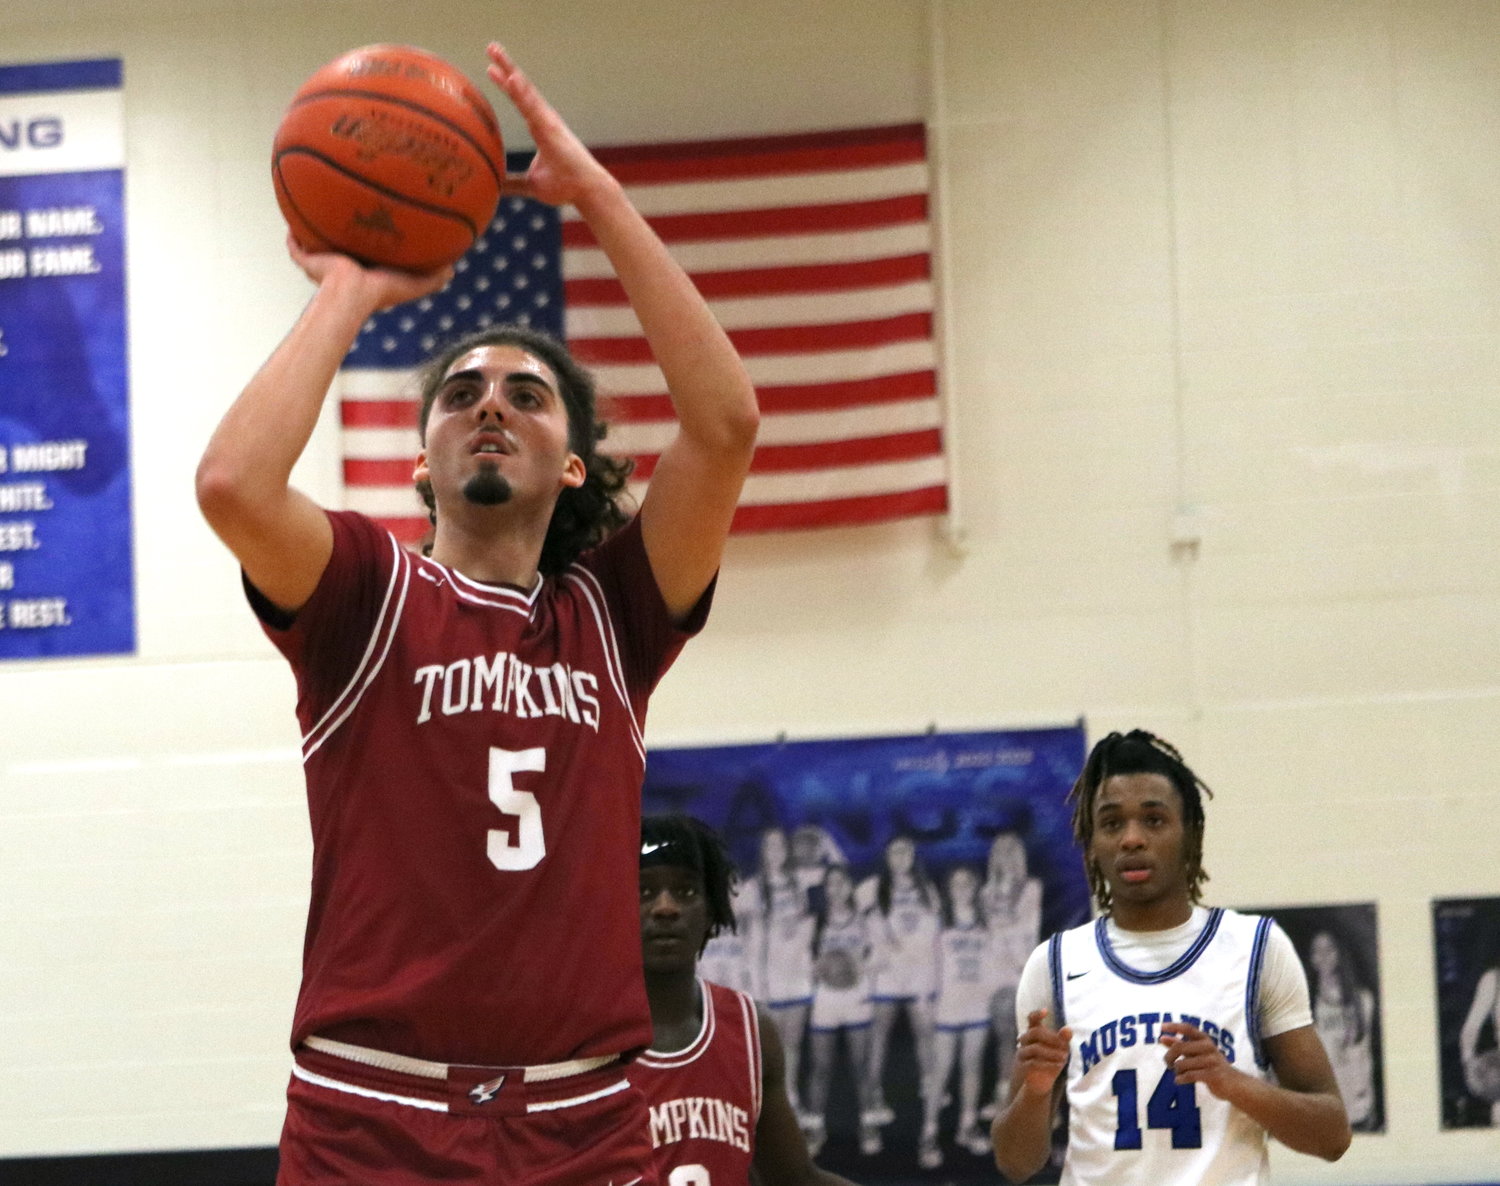 Luke Coughran shoots a free throw during Saturday's game between Tompkins and Taylor at the Taylor gym.